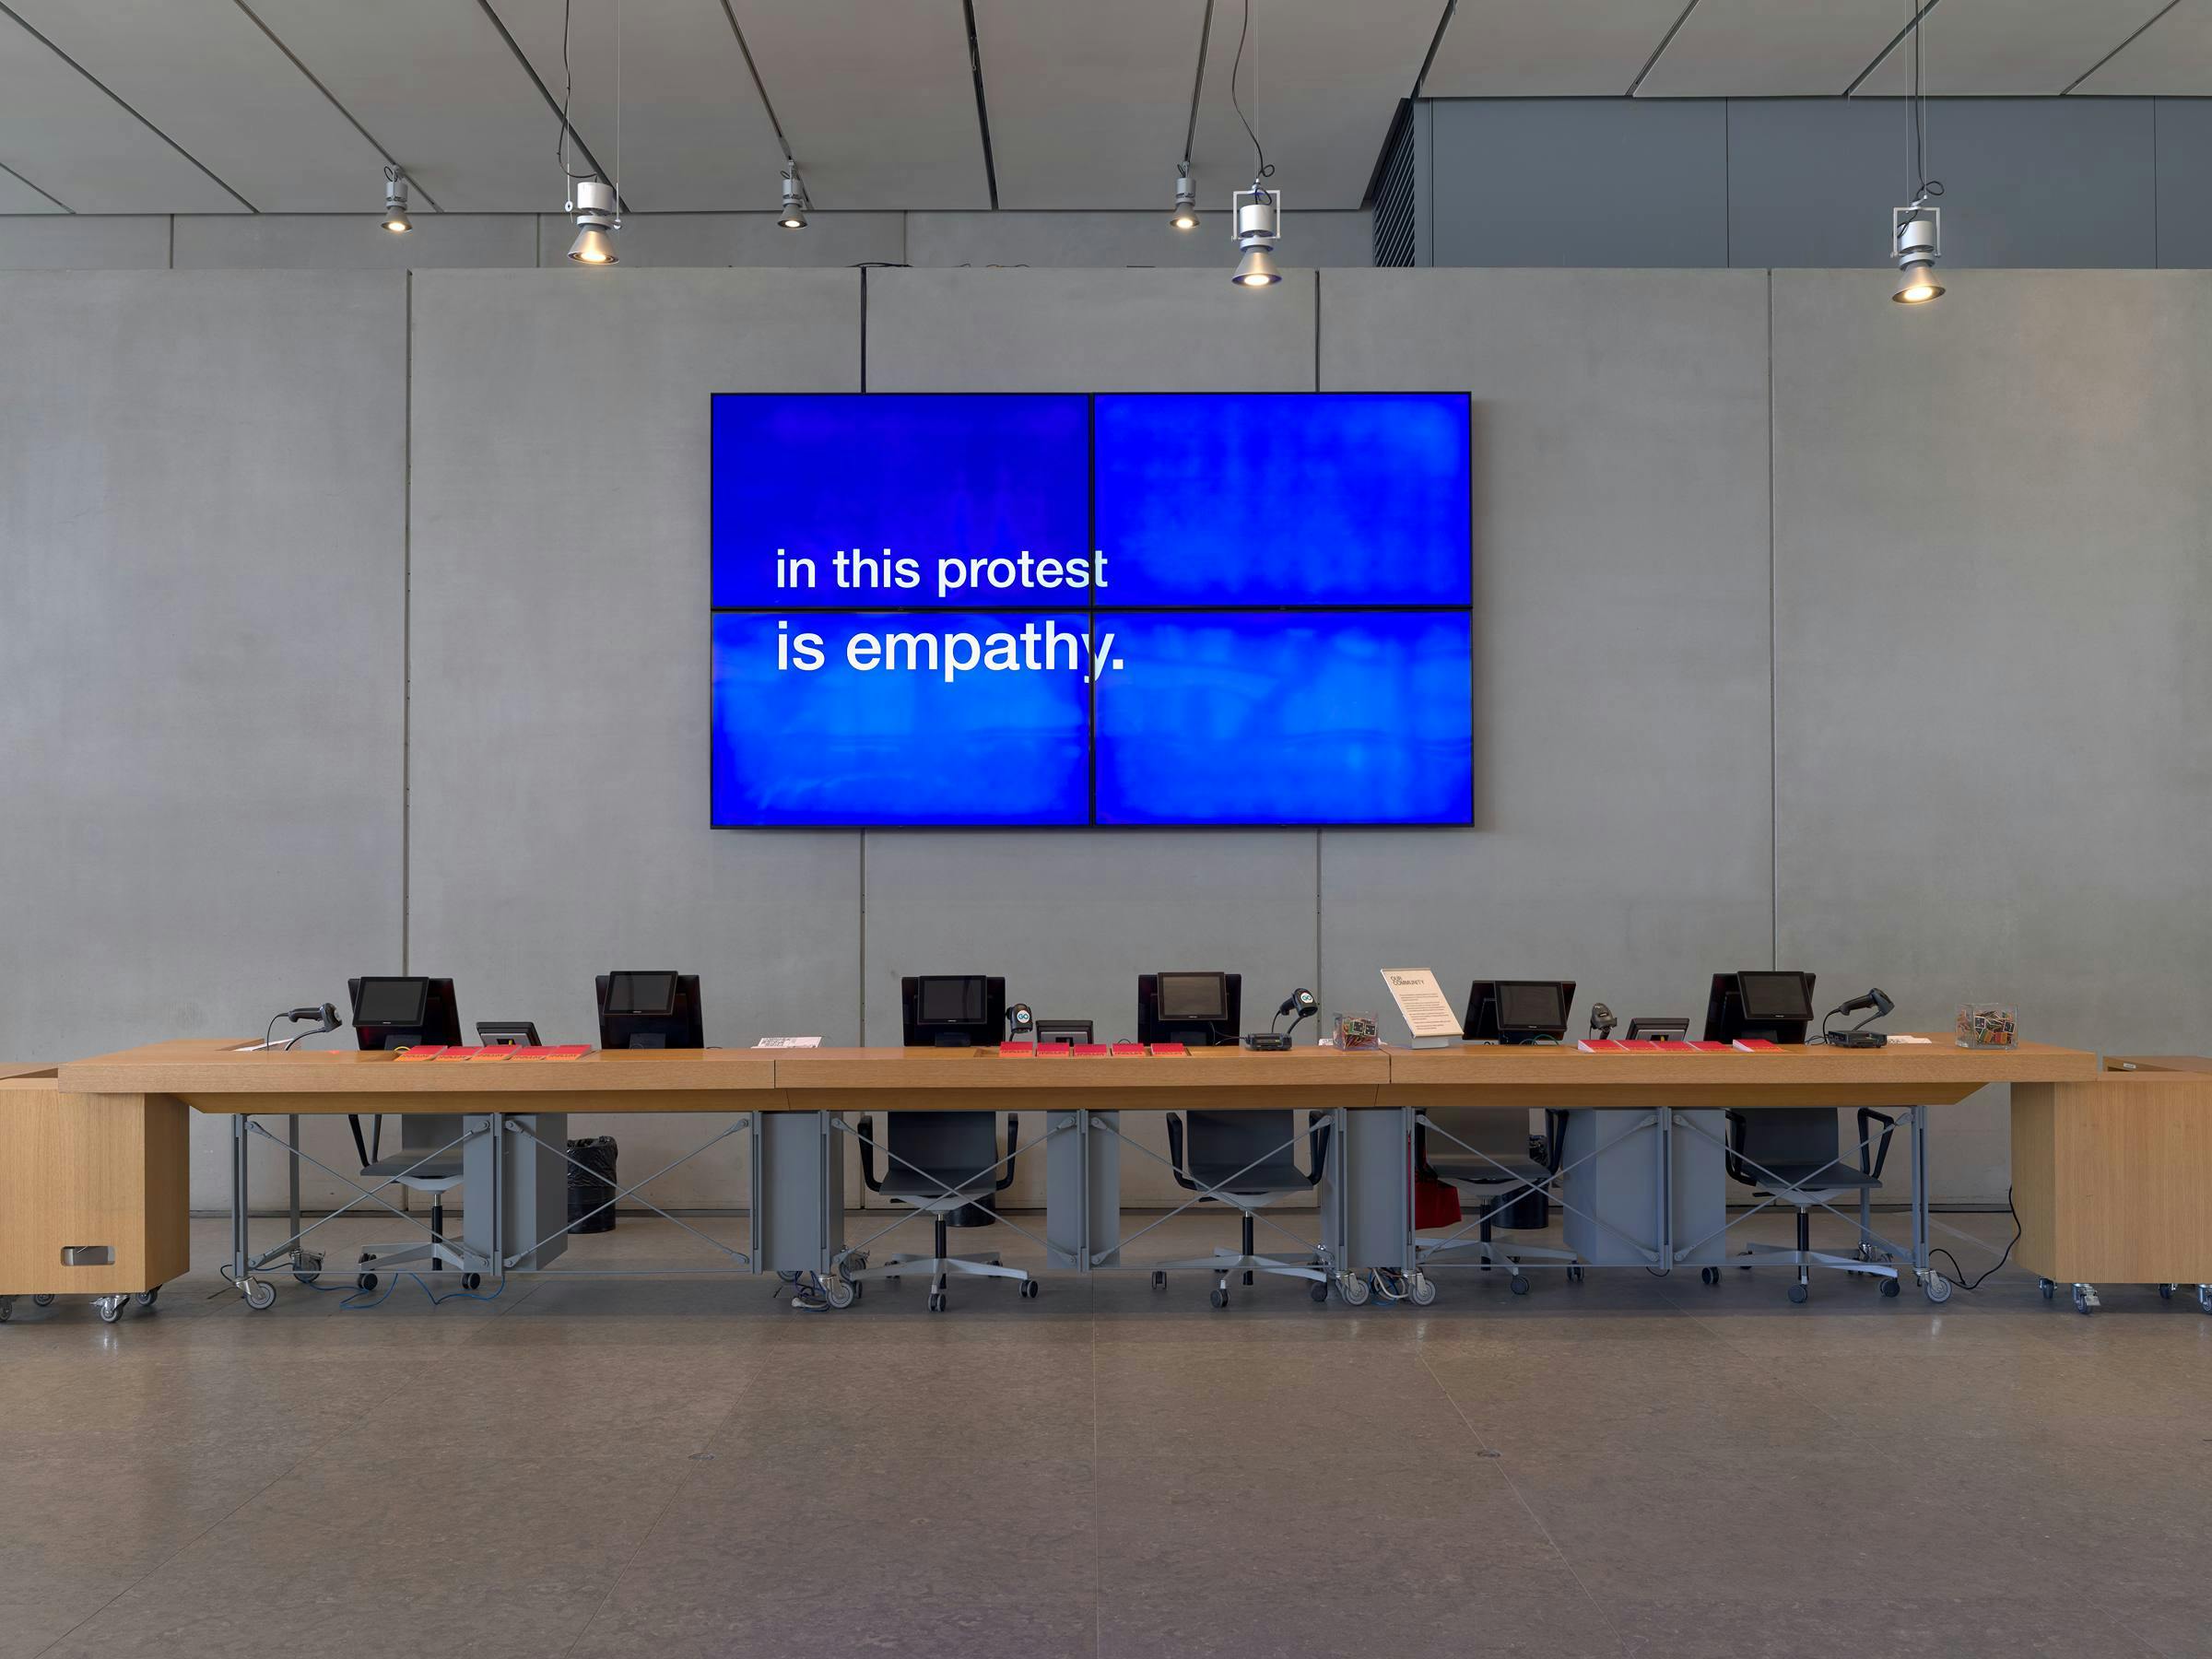 Image of a large screen on a grey wall with office desks and chairs in front of it